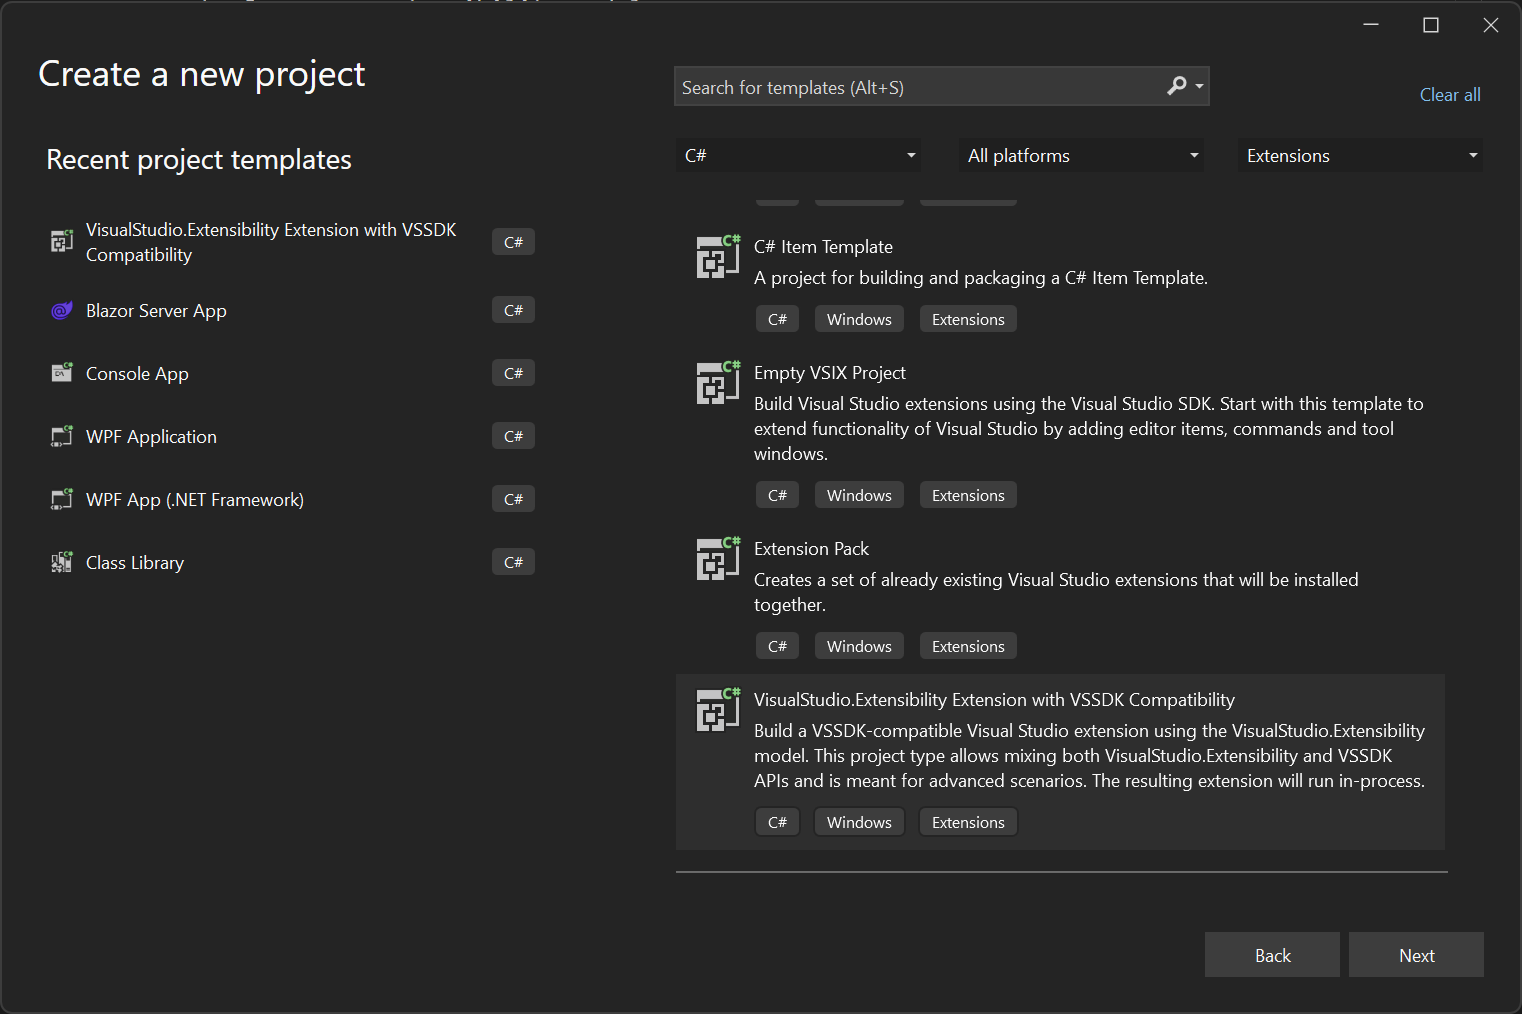 Screenshot of the VisualStudio.Extensibility in-process extension project template.